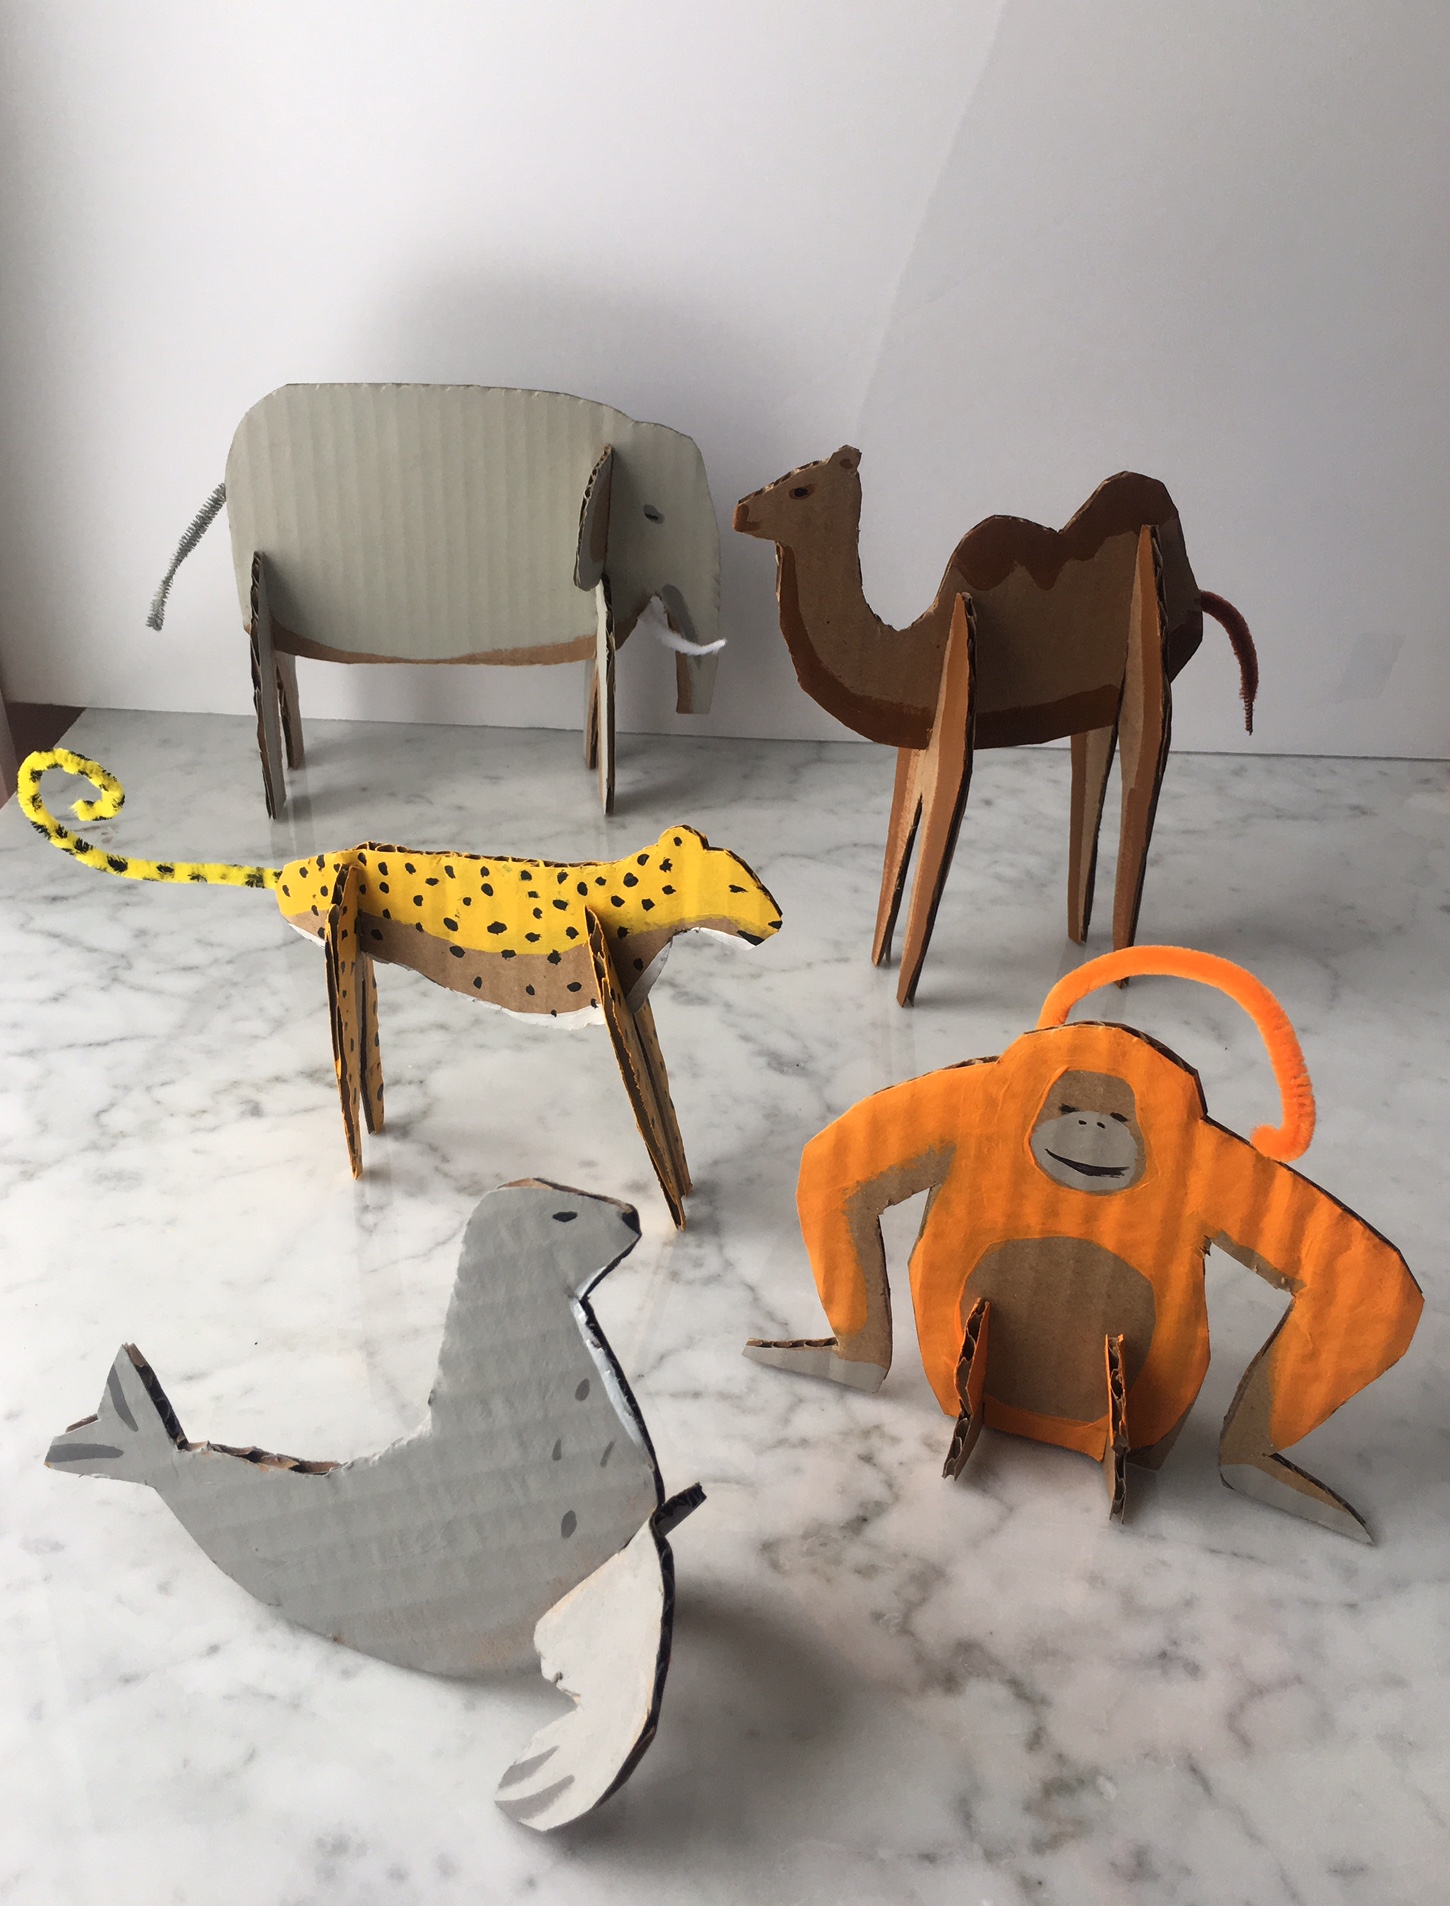 Recycled Cardboard Zoo Animals! — super make it